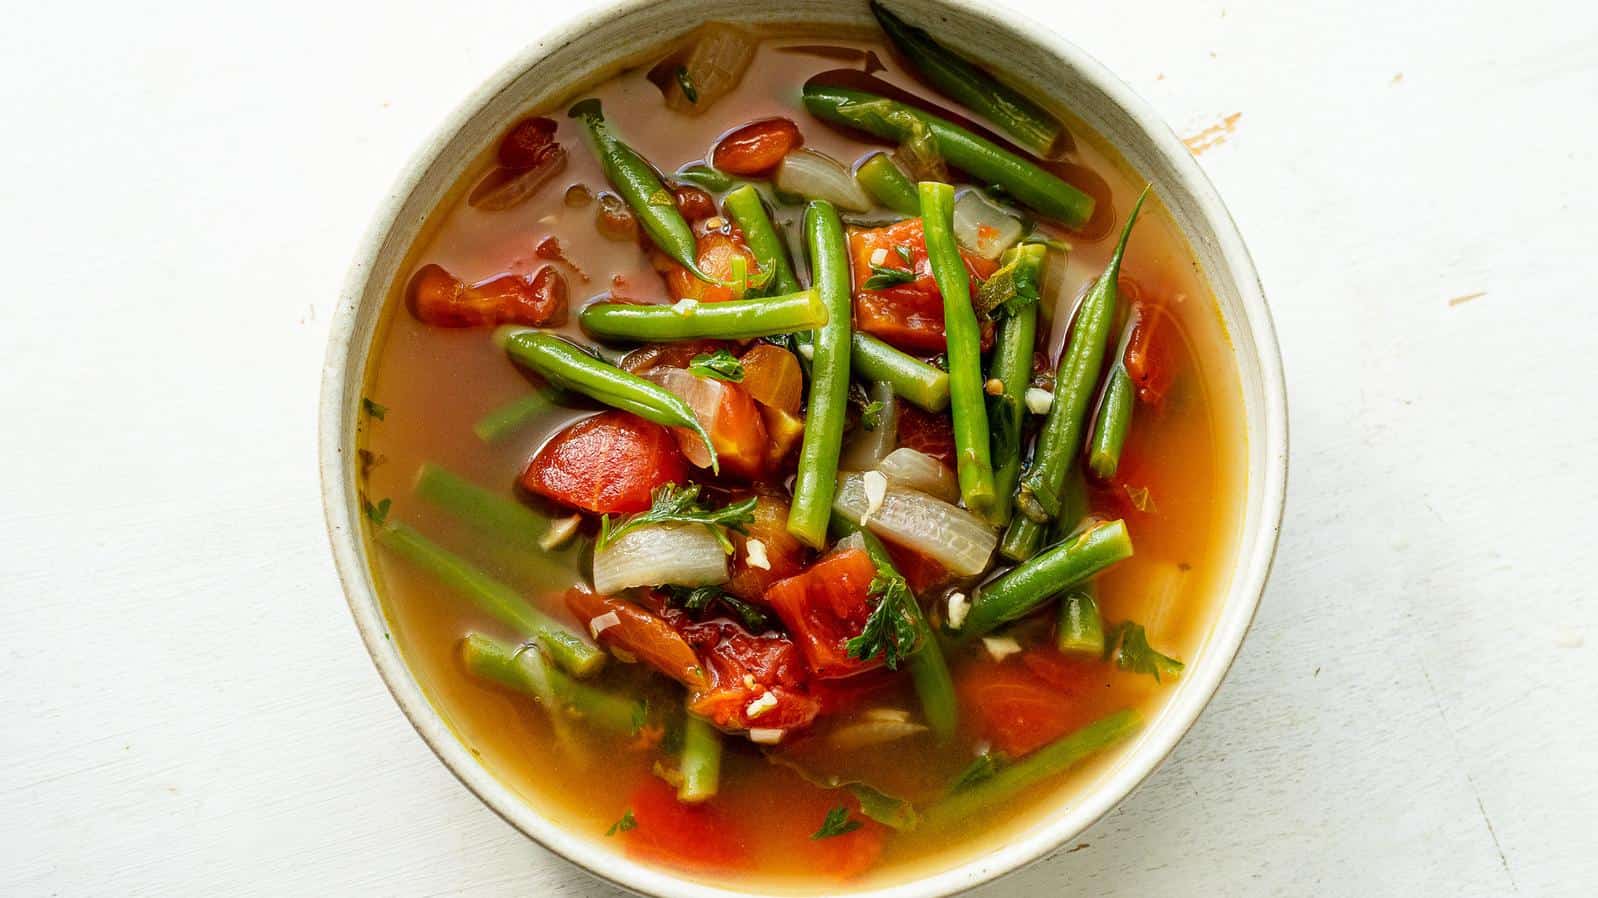  Pair this soup with some crusty bread and a salad for a satisfying and well-rounded meal.